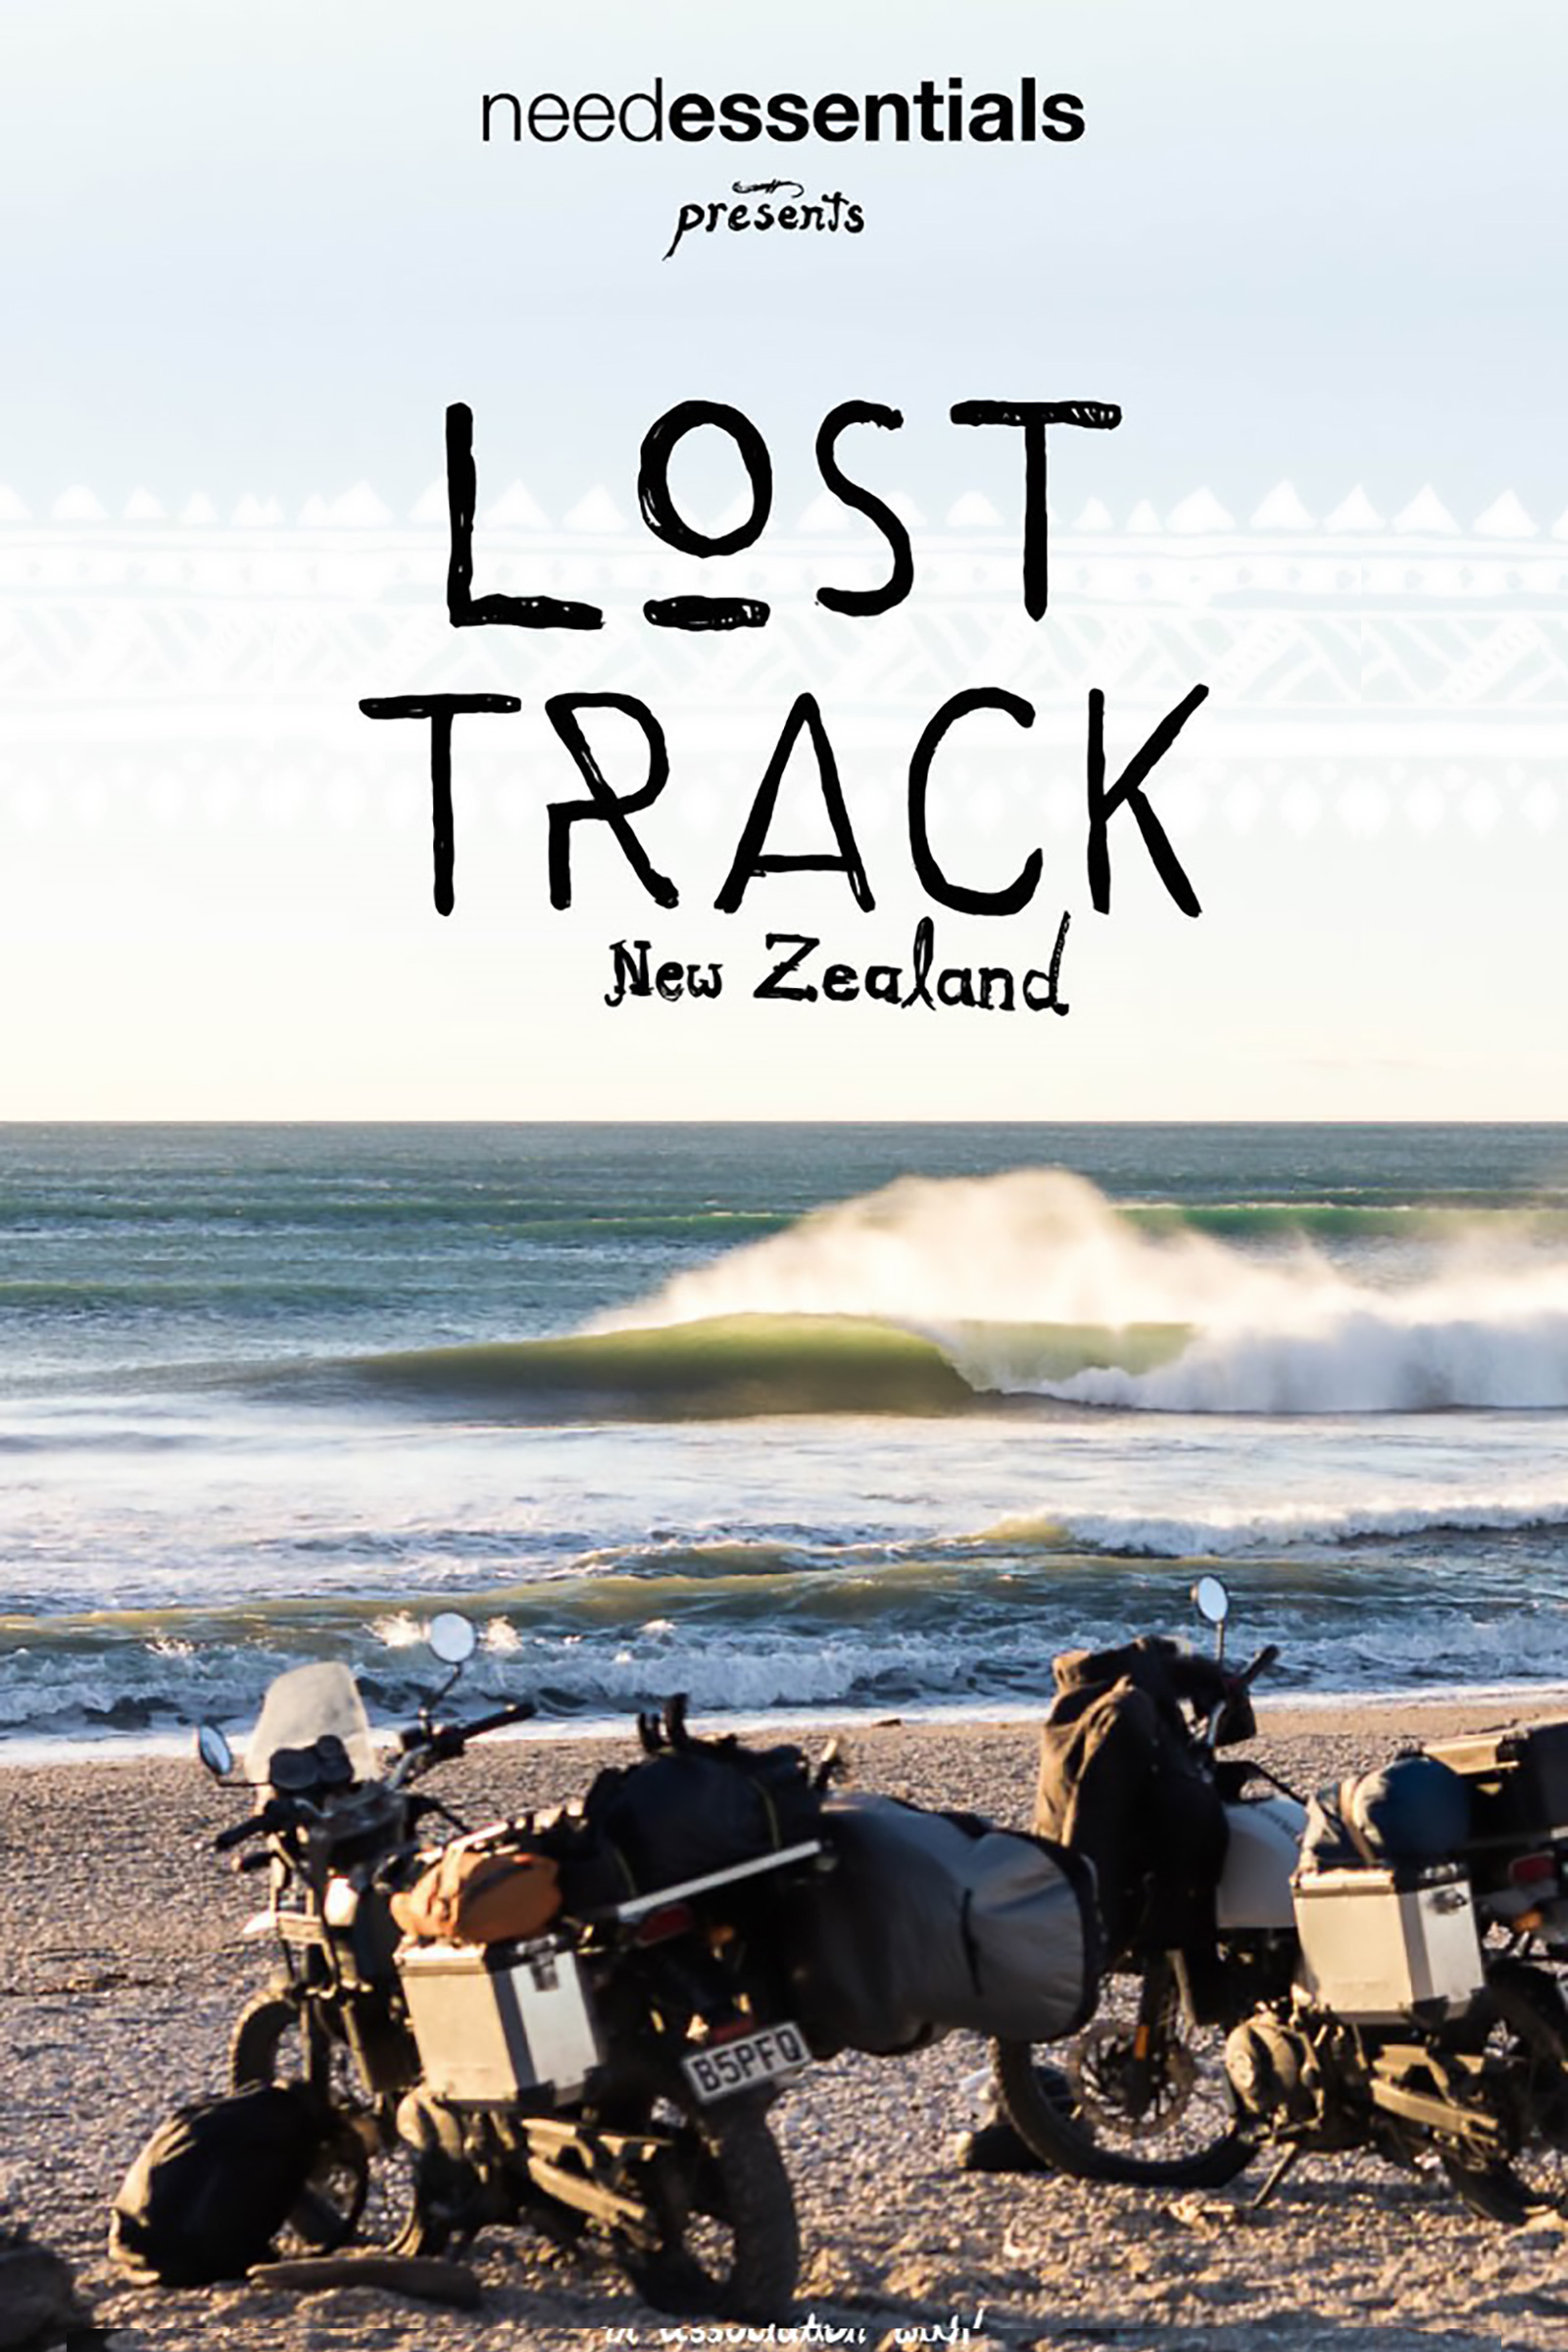 Where to stream Lost Track New Zealand